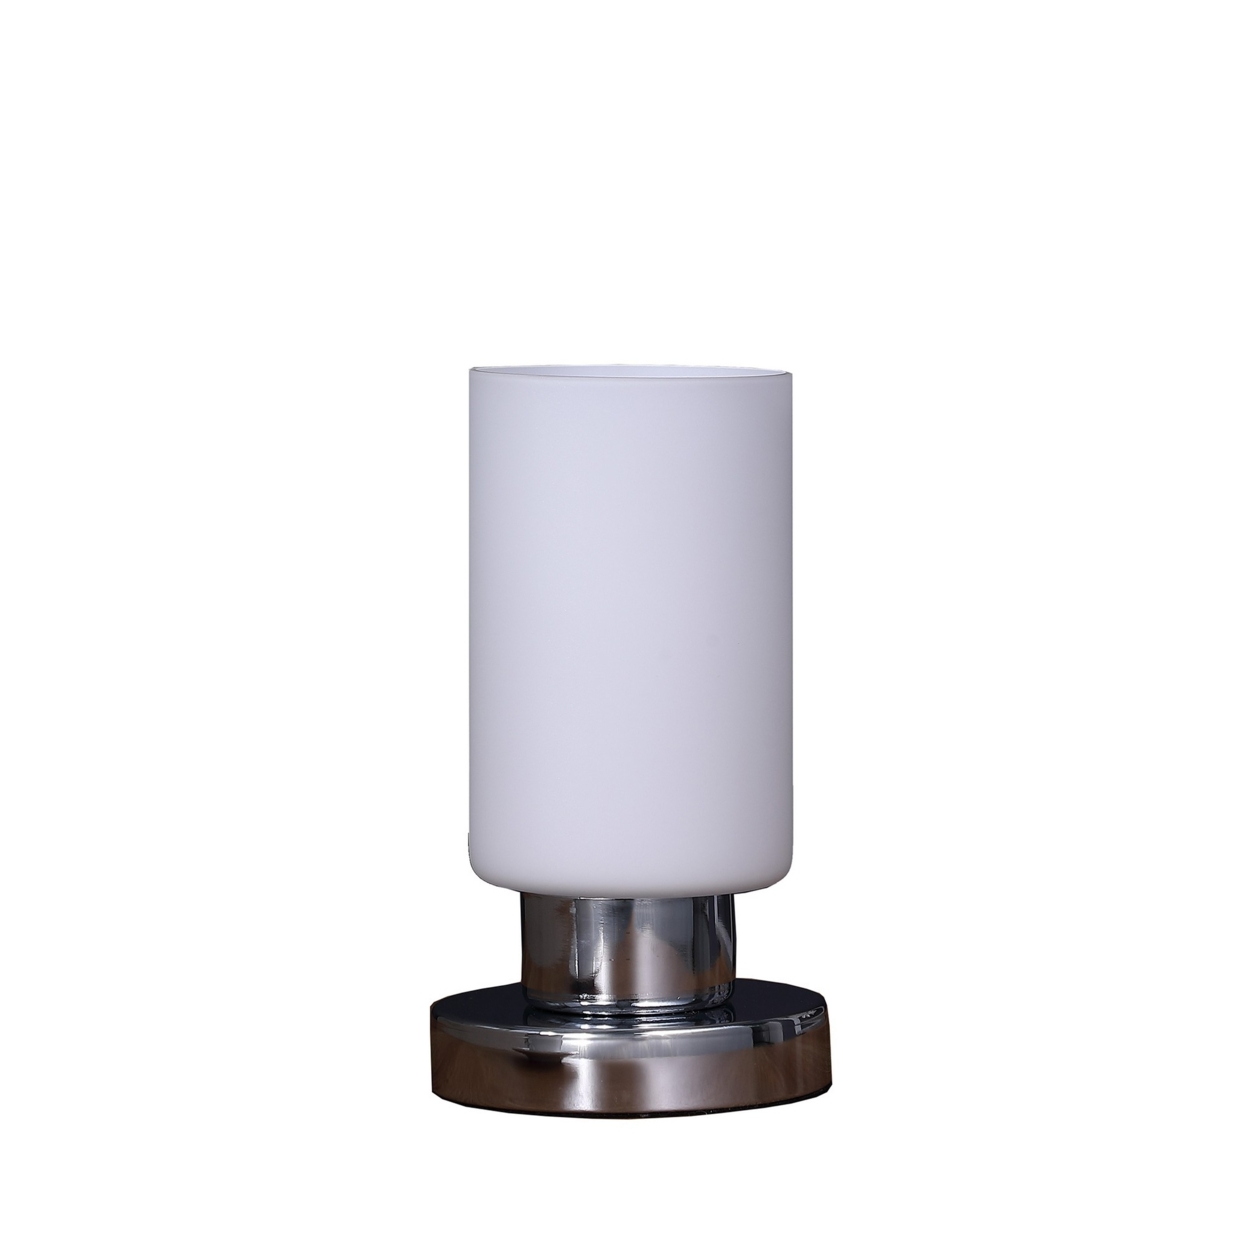 Cylindrical Glass Shade Table Lamp With Touch Switch, White- Saltoro Sherpi